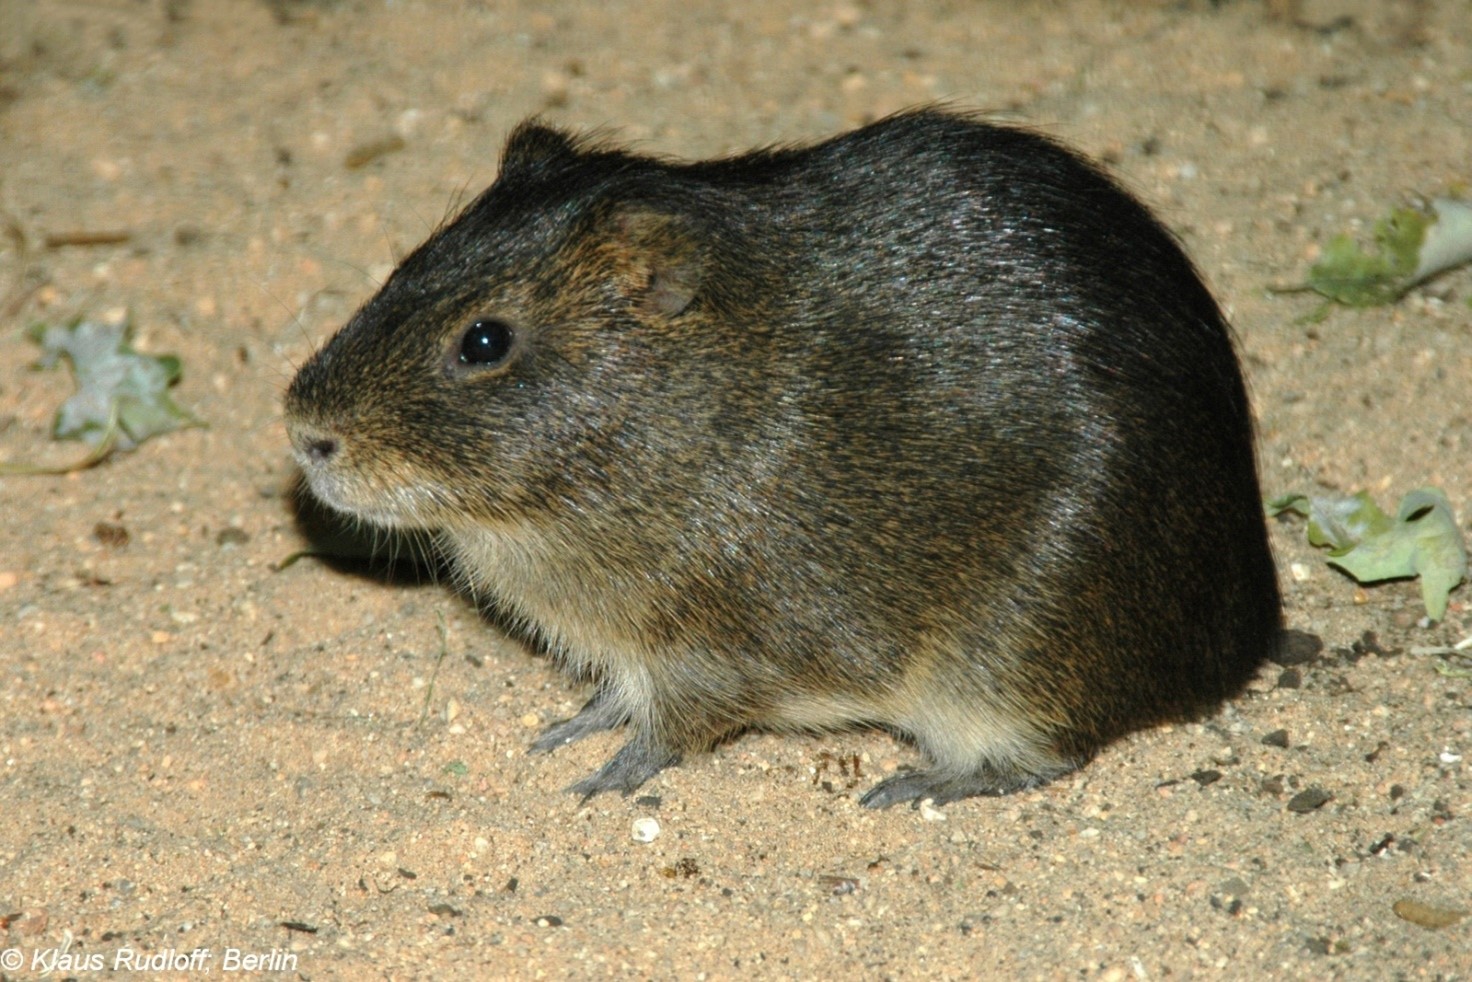 A small, brown rodent against a sandy ground with a few leafs or plants nearby